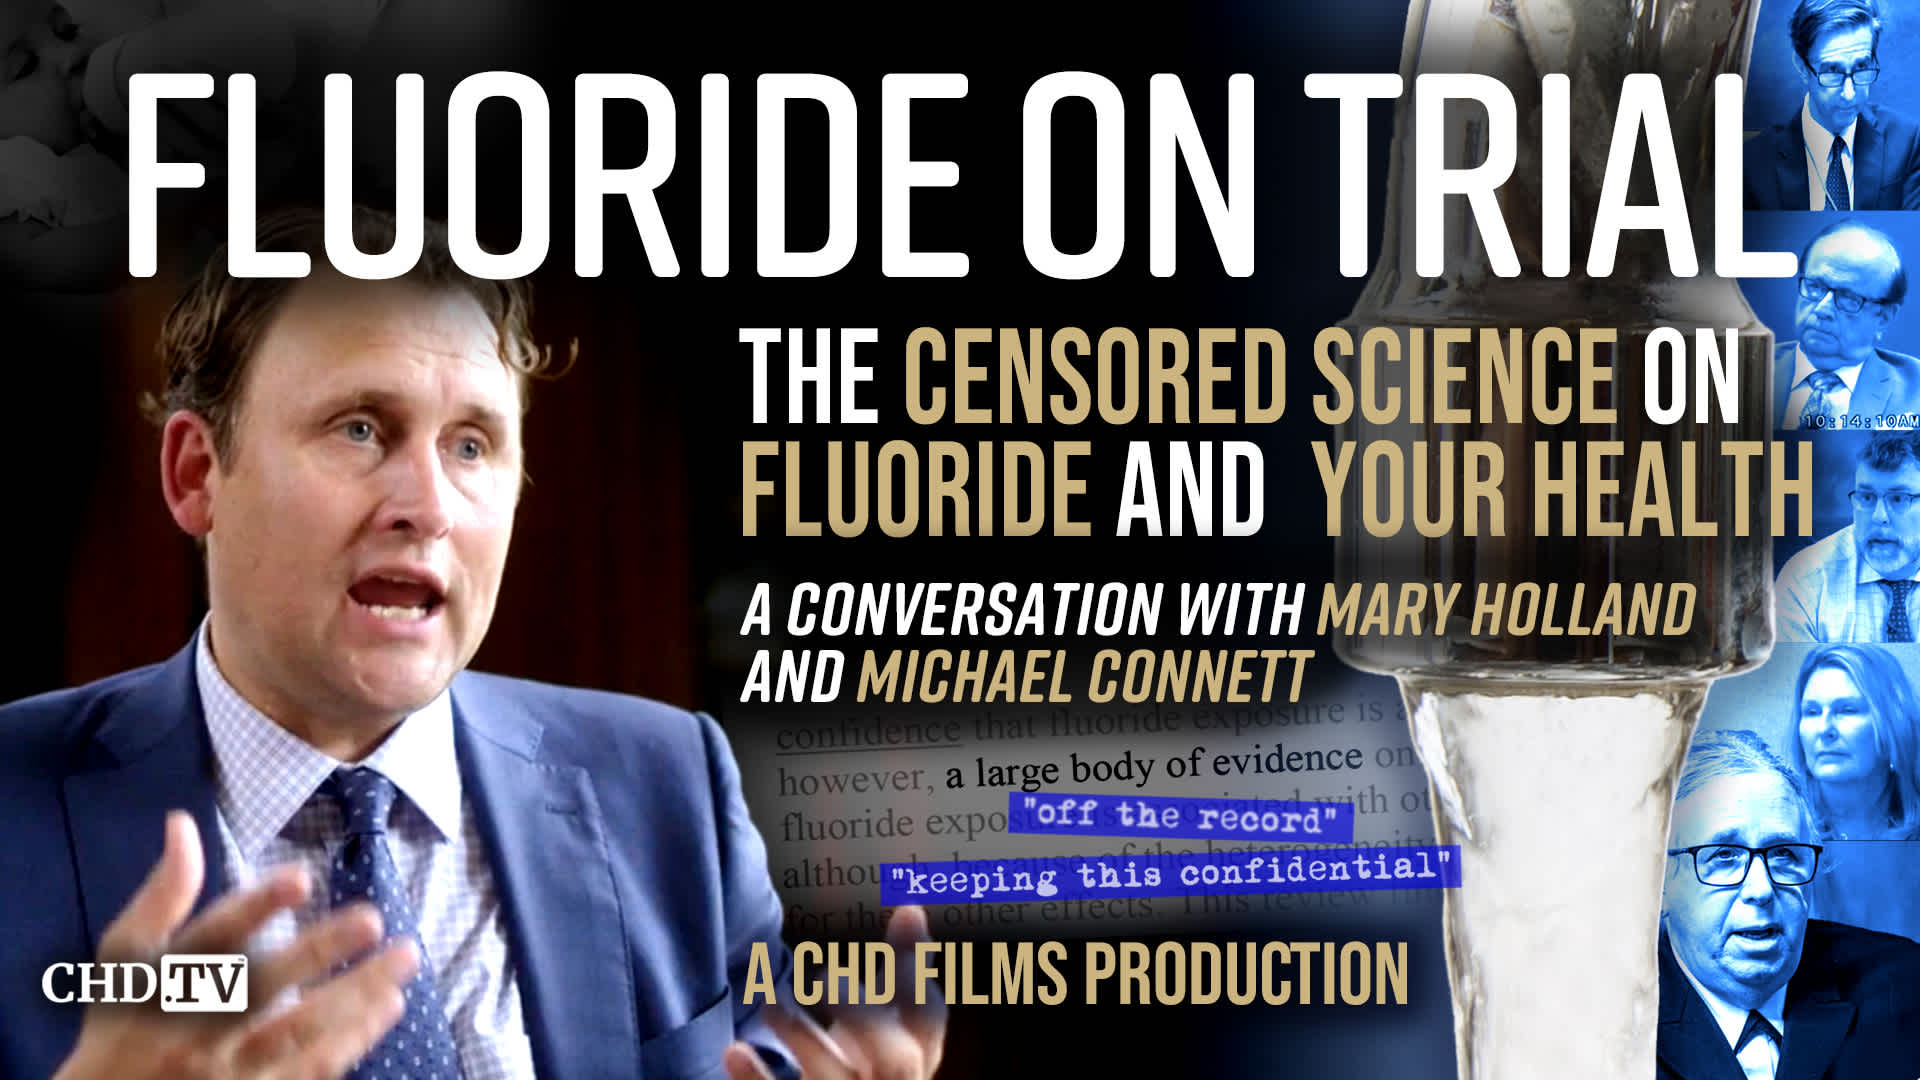 Fluoride: Put It on Your Teeth, But Don’t Swallow